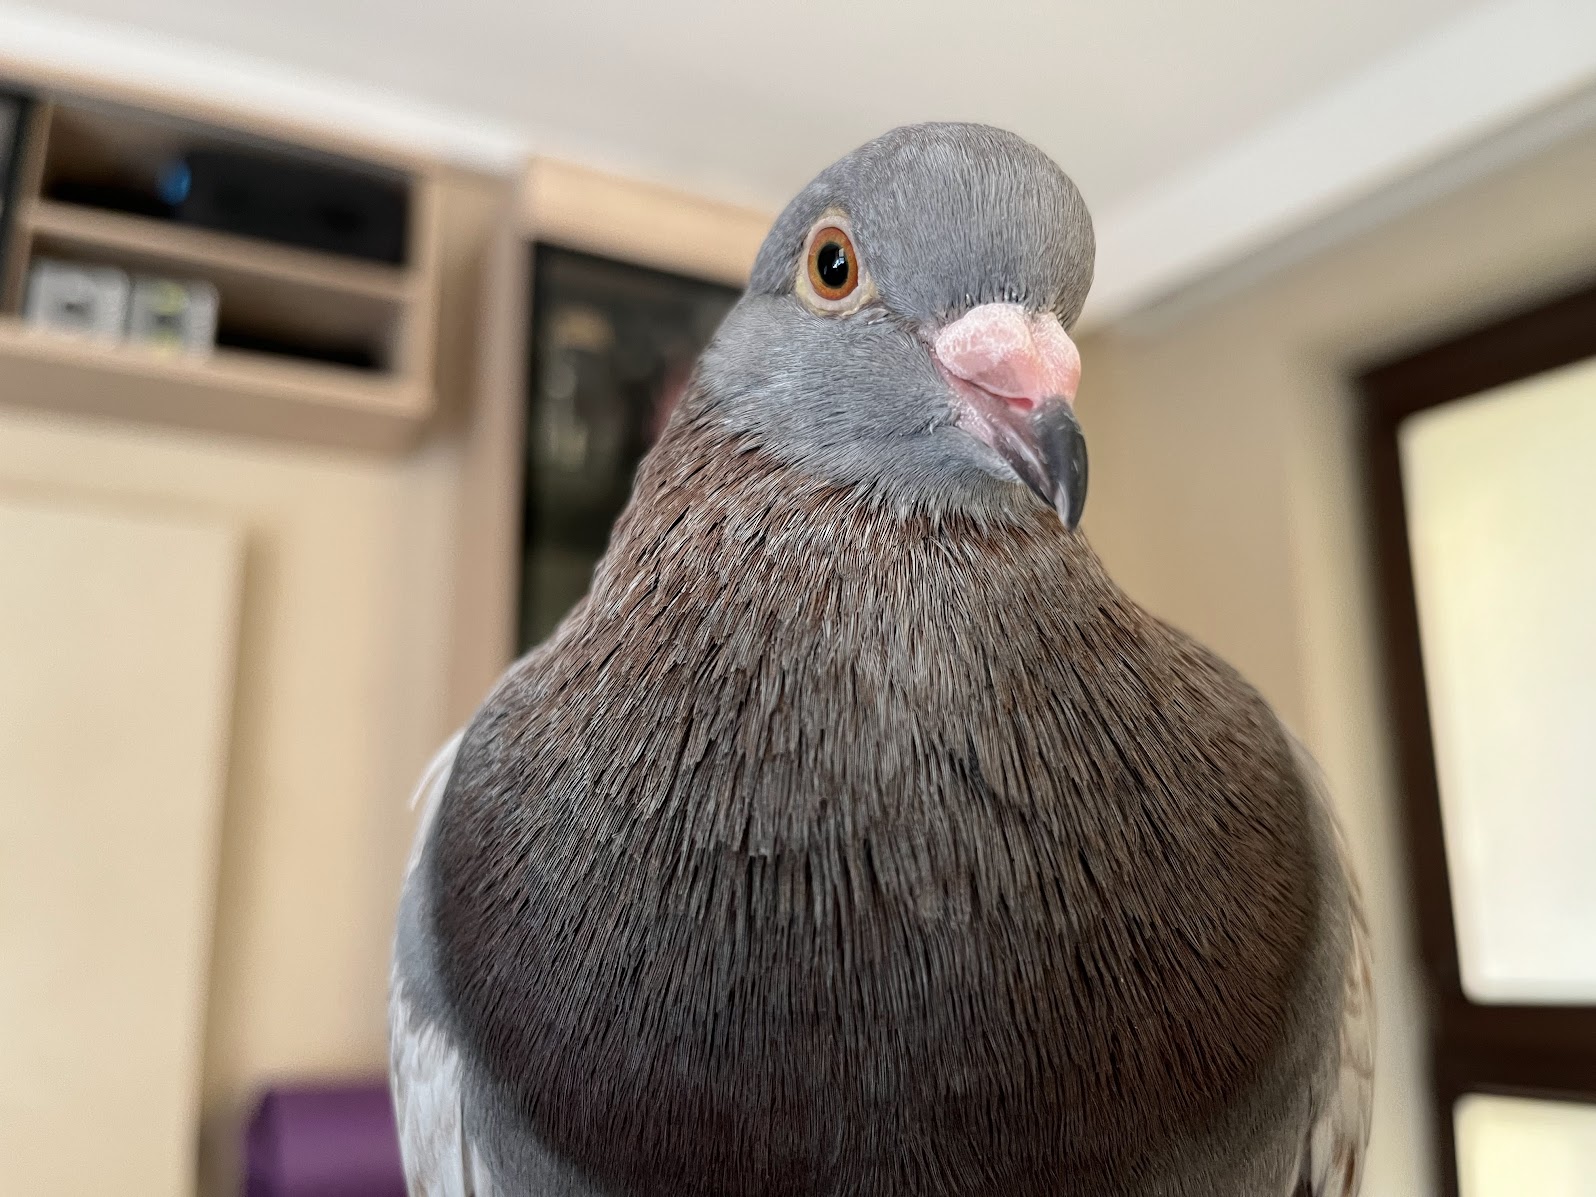 Are pigeons good pets?